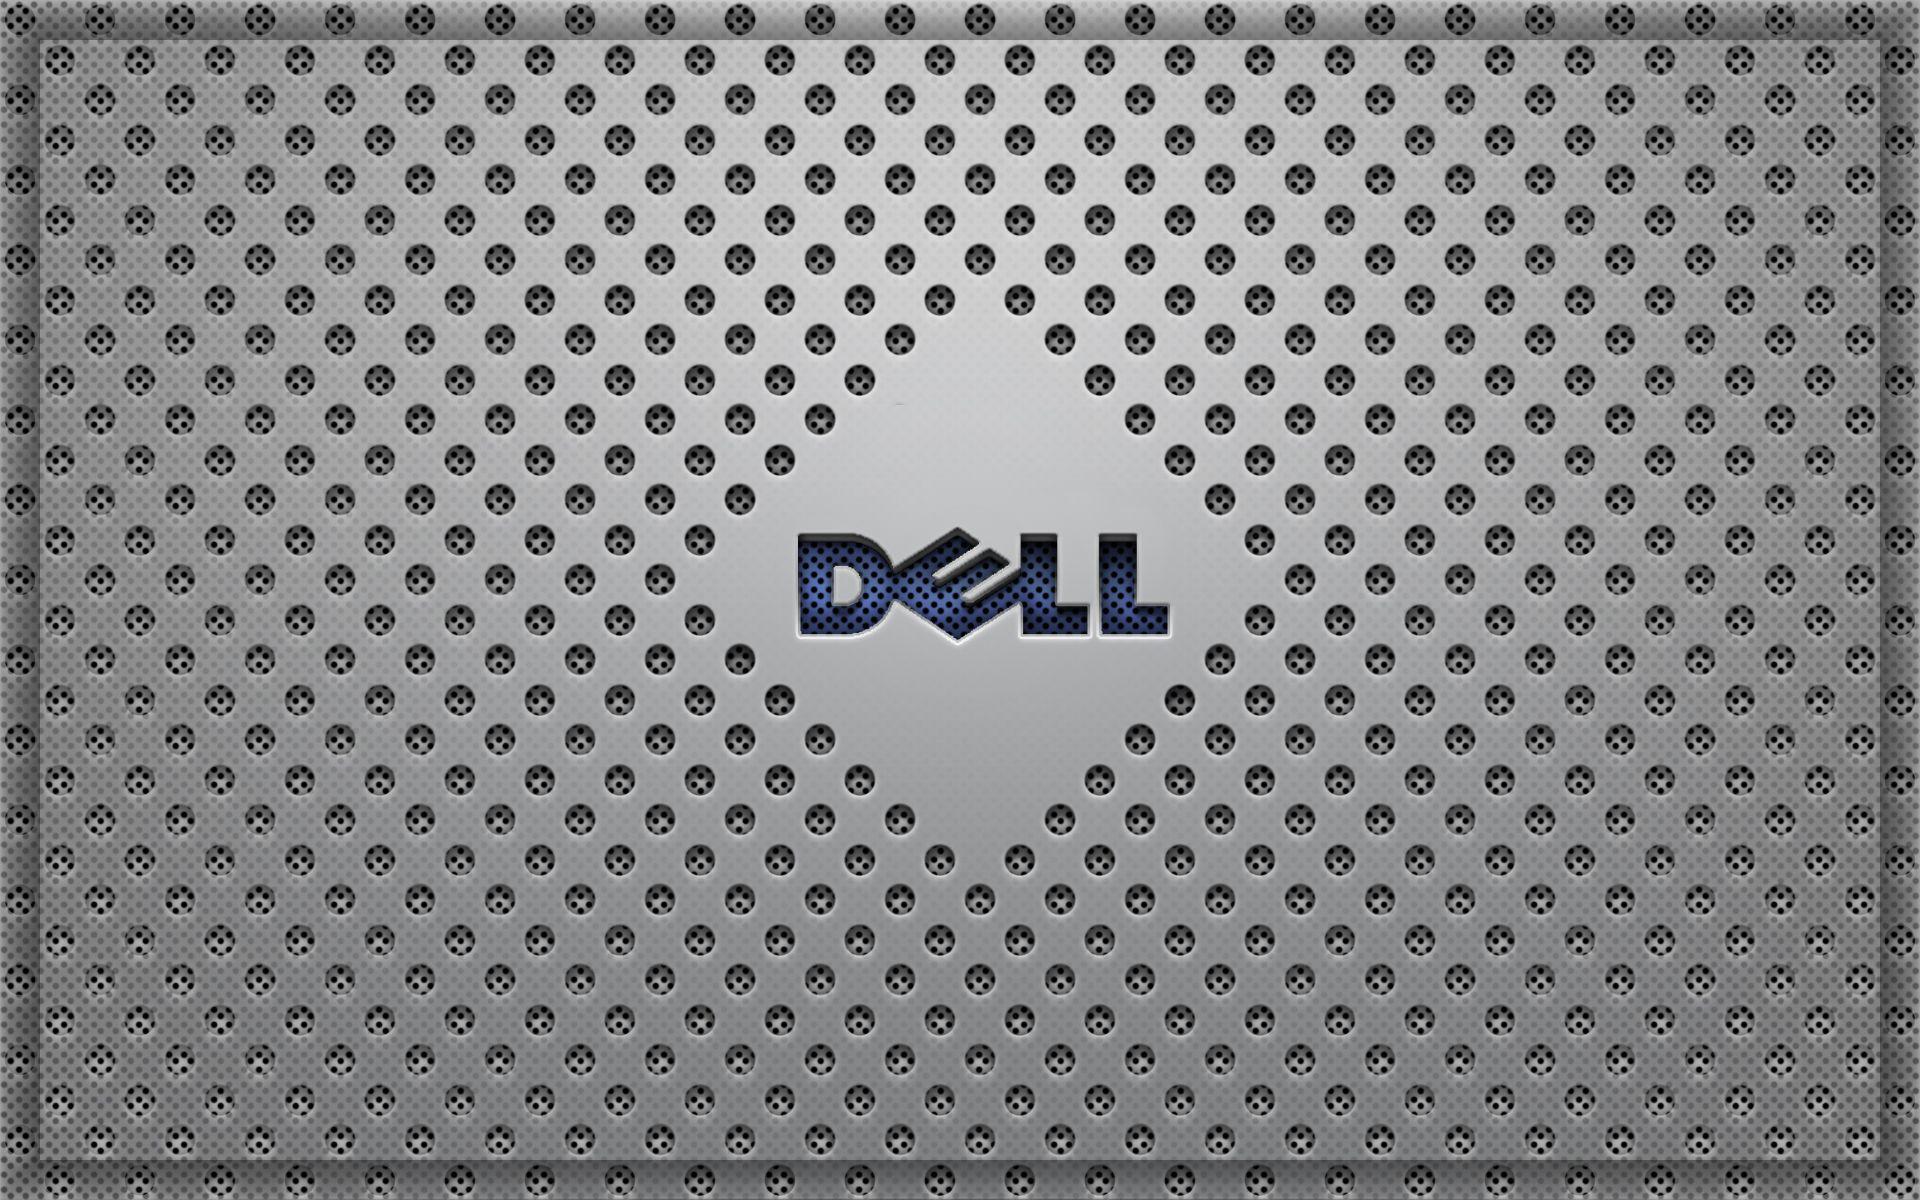 Dell Logo Wallpapers Top Free Dell Logo Backgrounds Wallpaperaccess